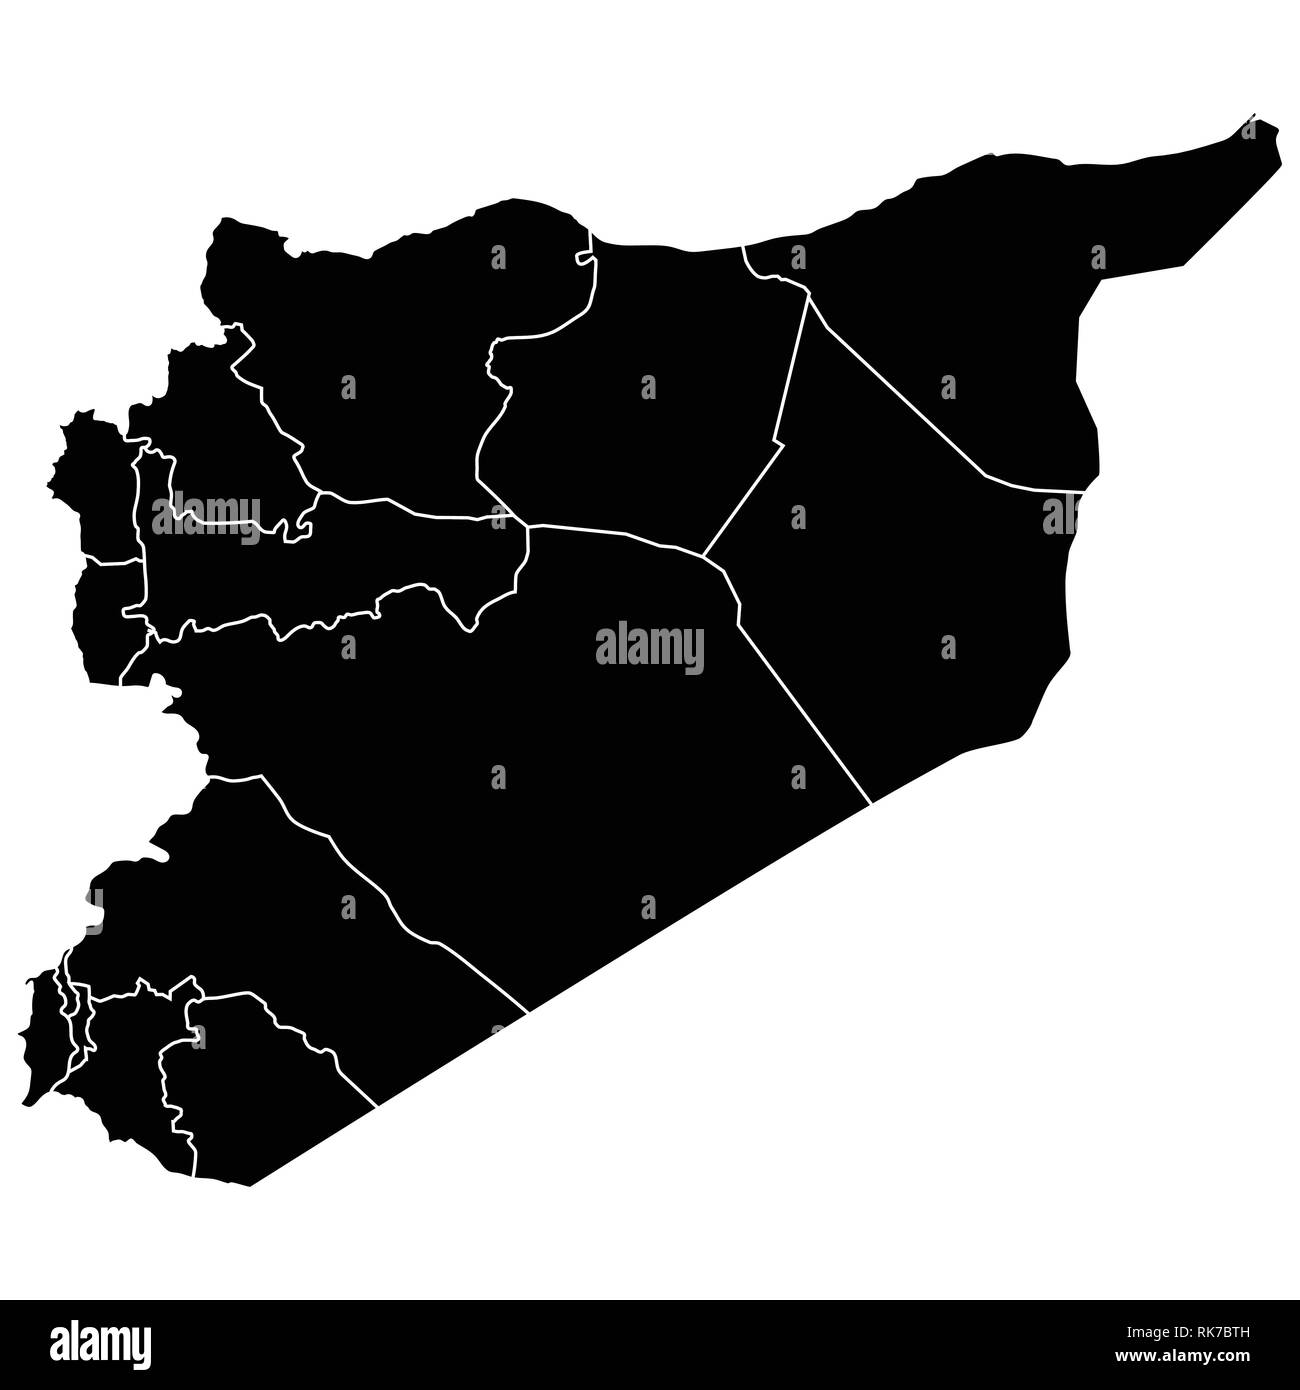 Vector illustration map of syria. Black silhouette Stock Vector